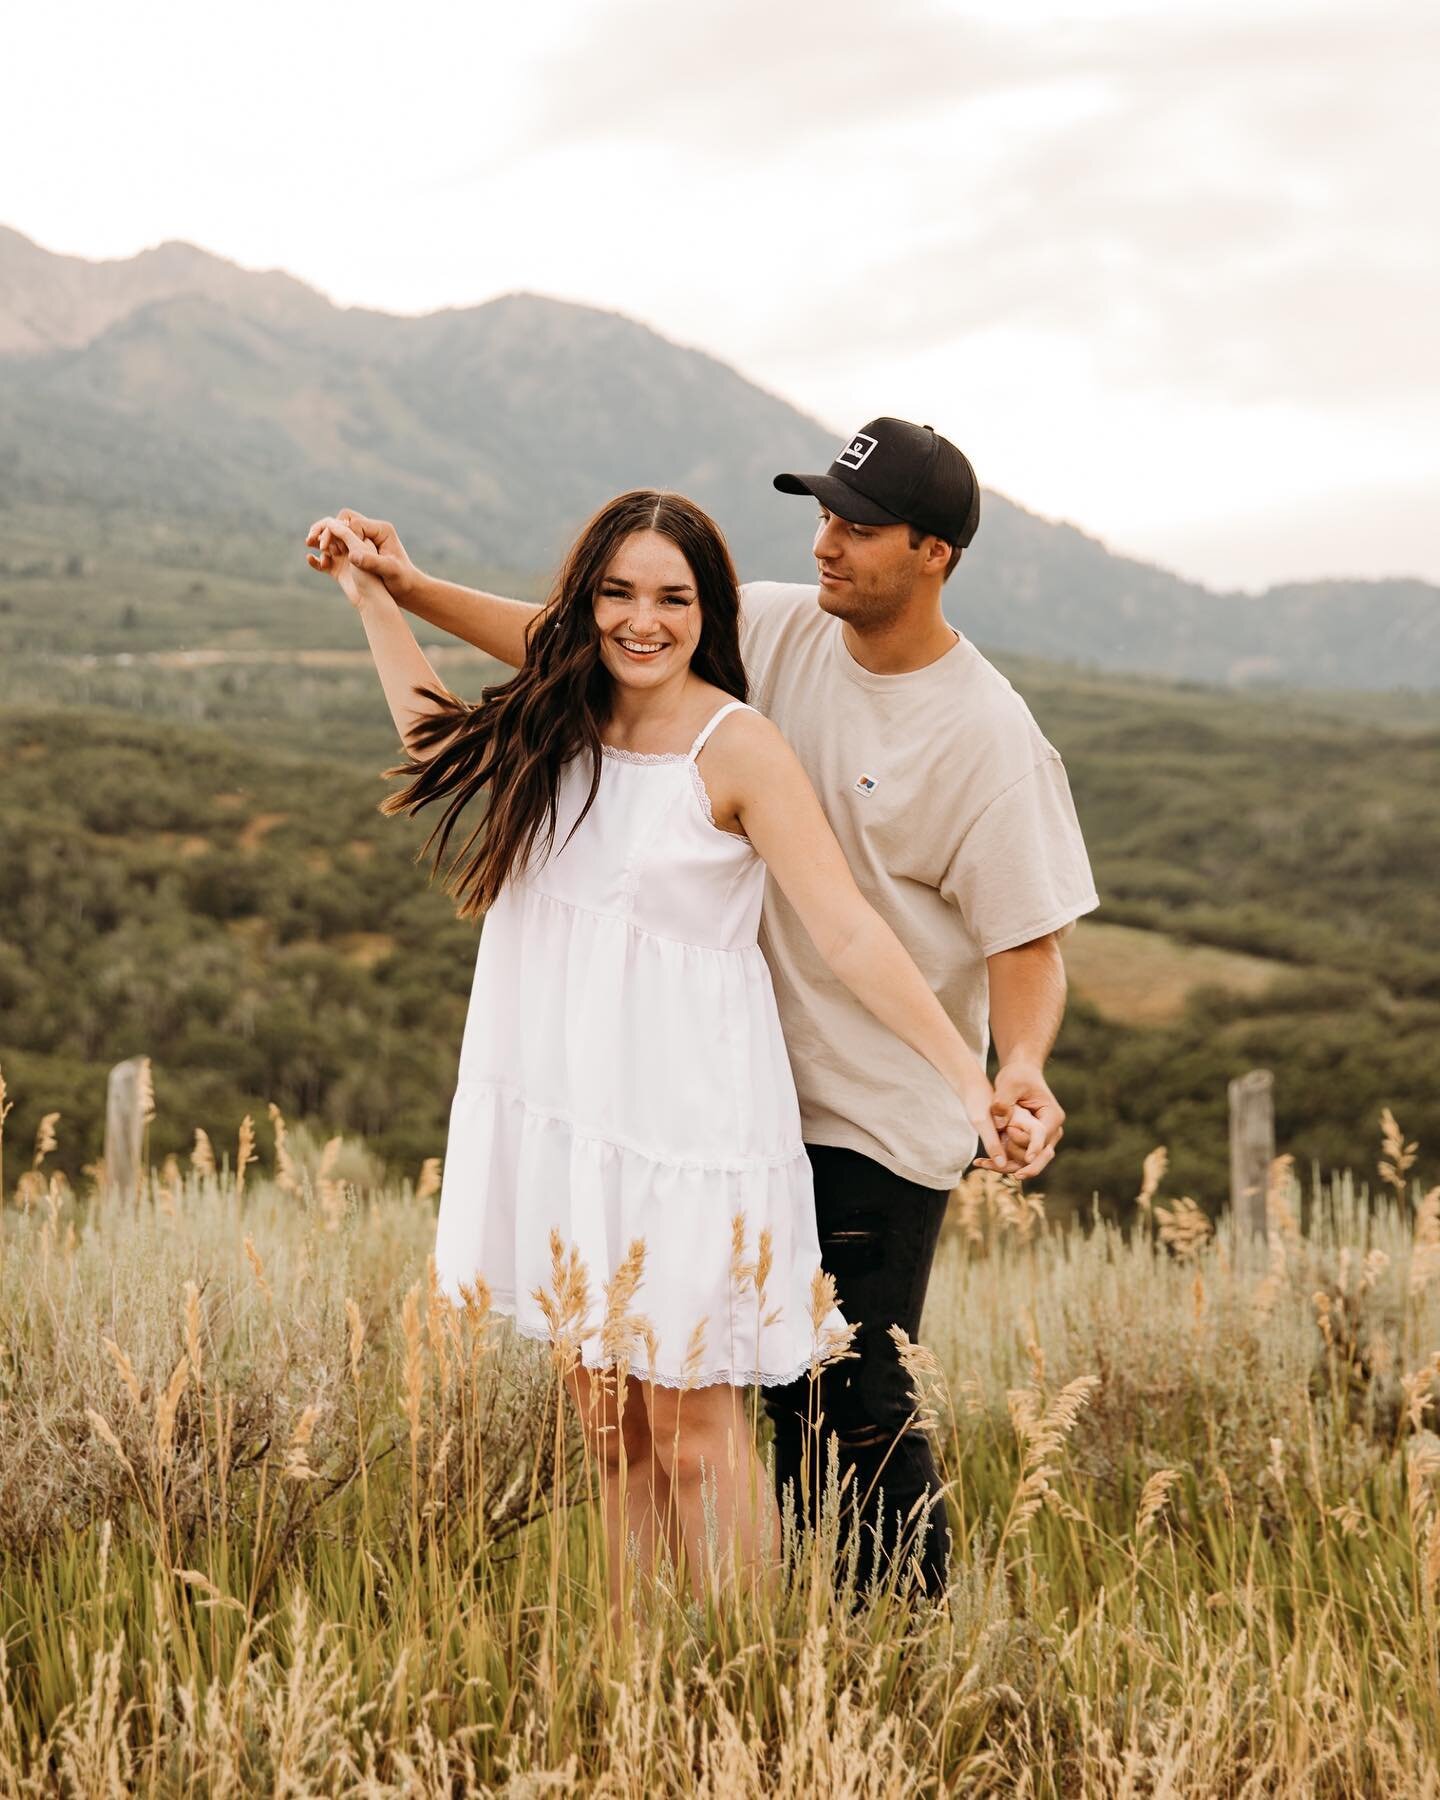 Libby + Stone🌾 The prettiest mountain session with these two!